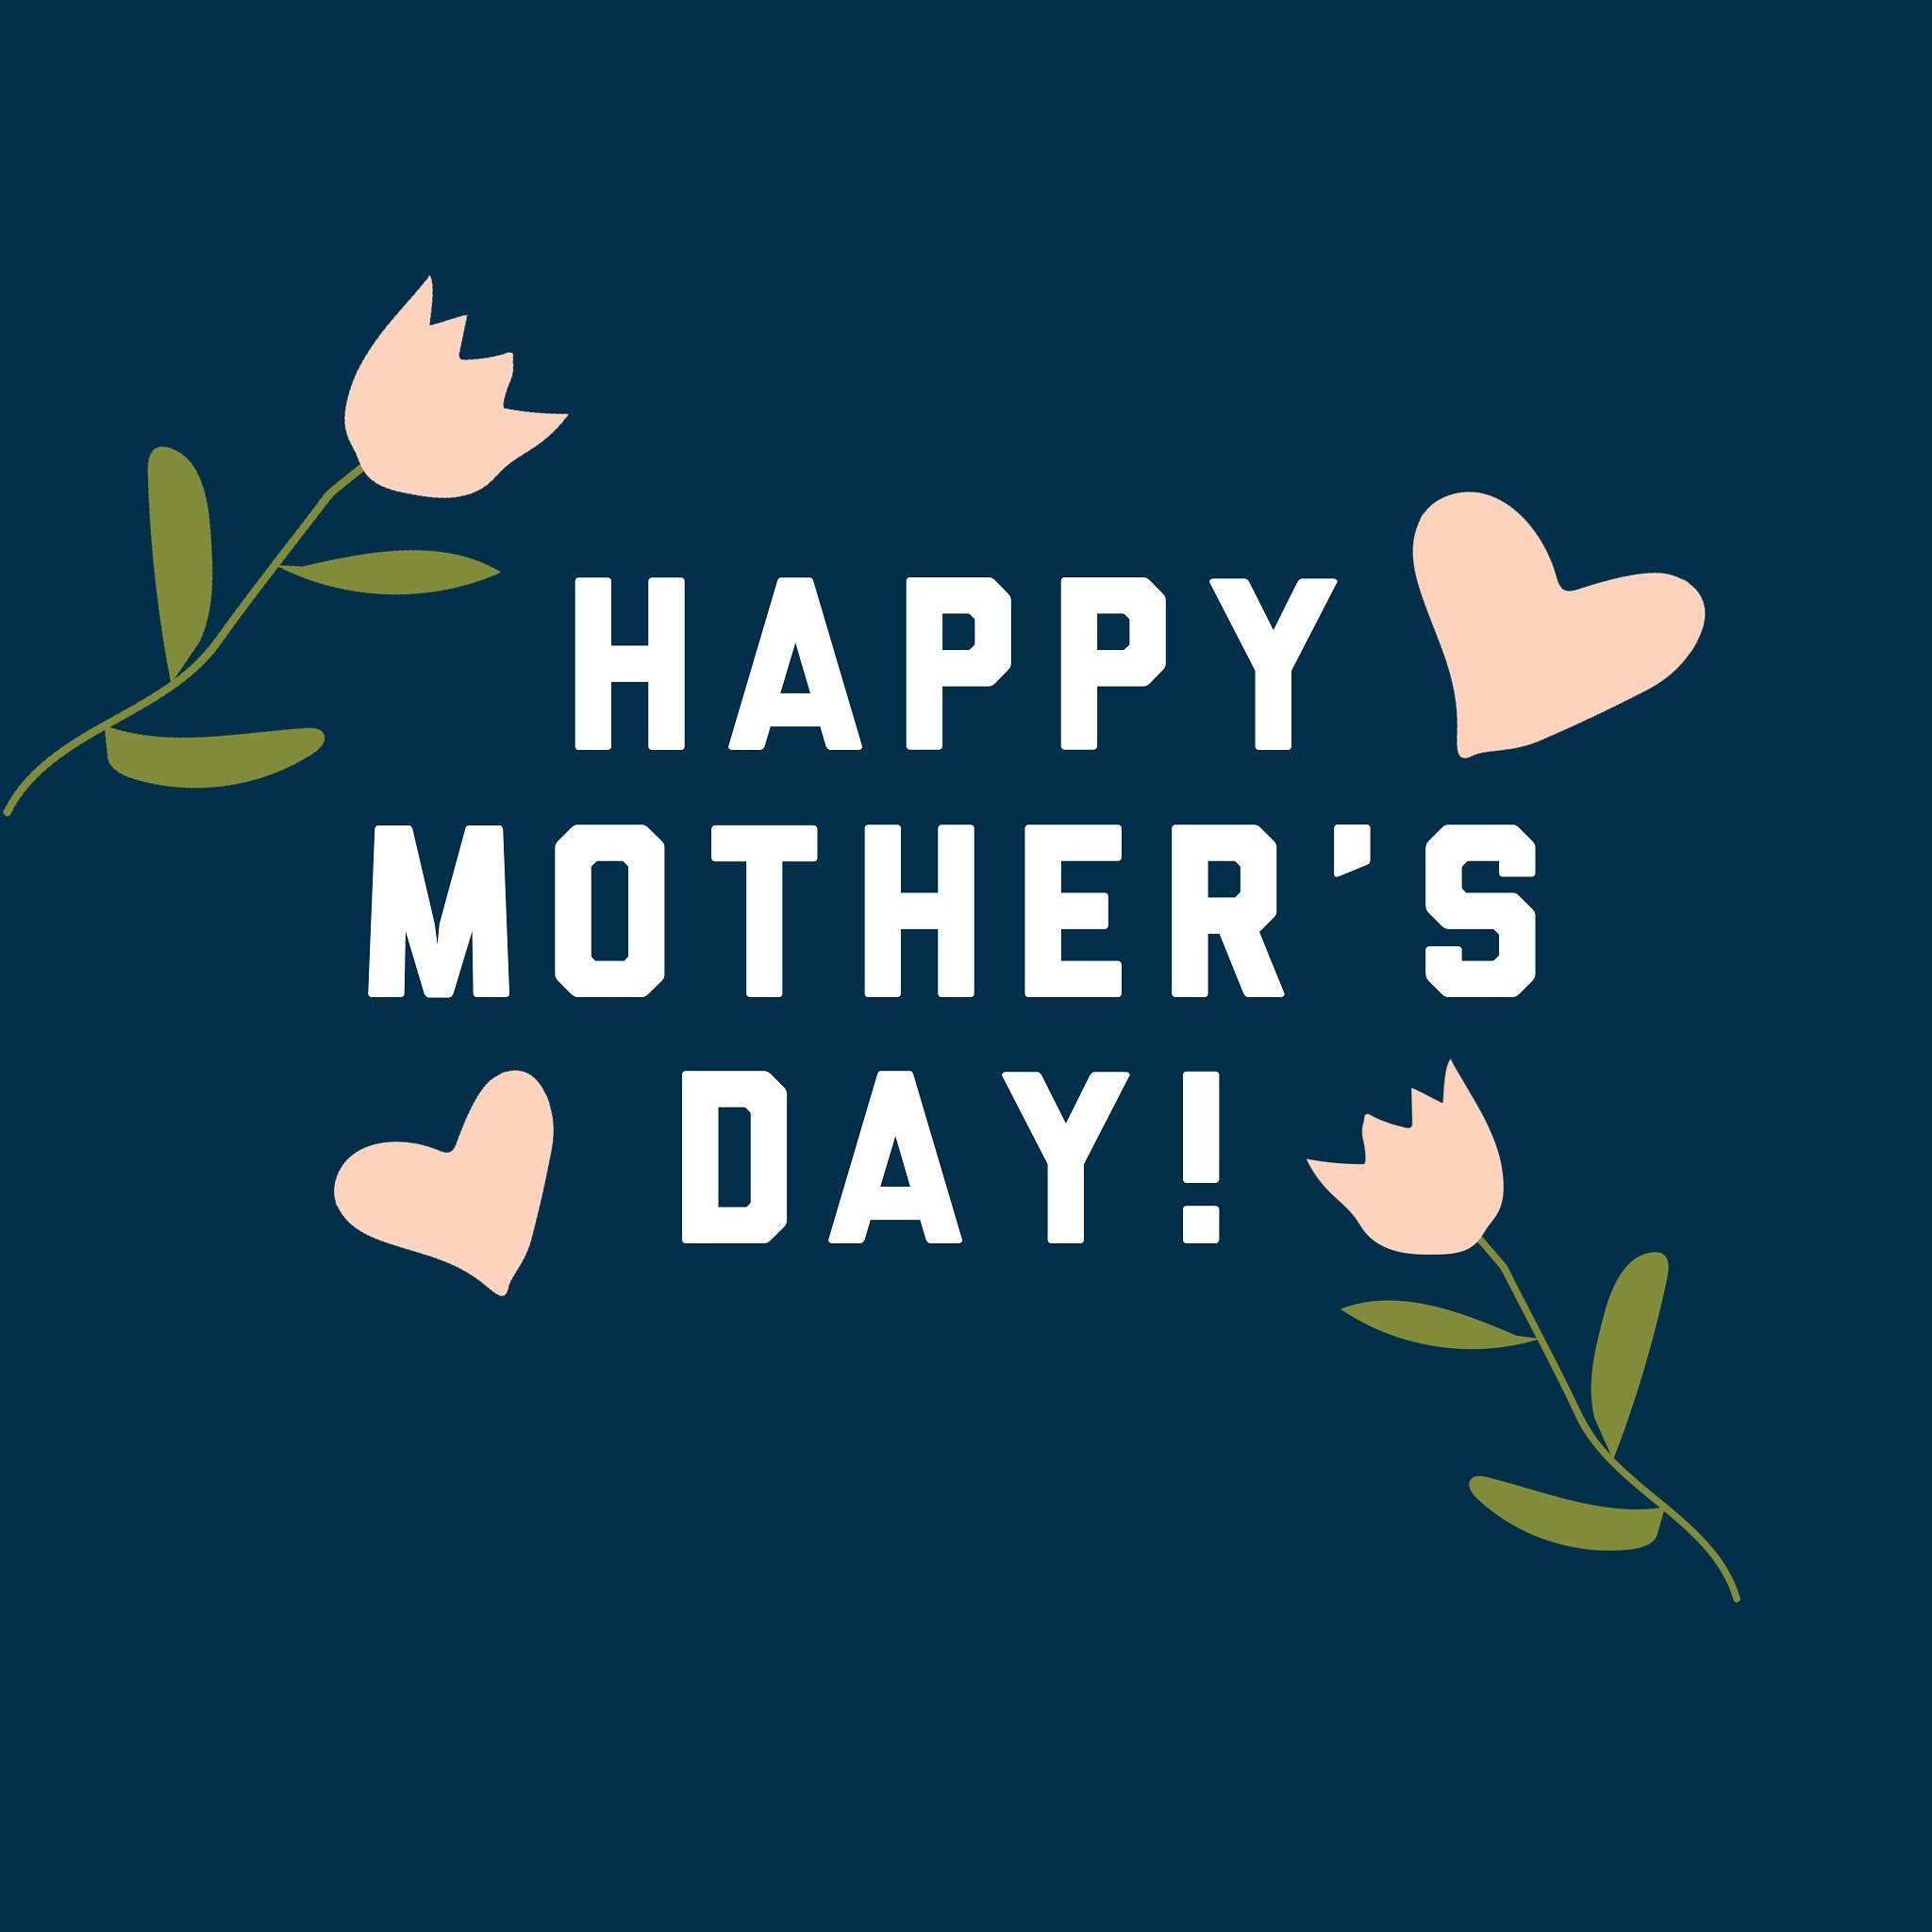 Happy Mother&rsquo;s Day to all the mothers, single mothers, stepmothers, dog mothers, grandmothers, aunts, sisters, and other women in our lives that care for us and love us unconditionally&hellip; Hope you loved yourself well today no matter you ar